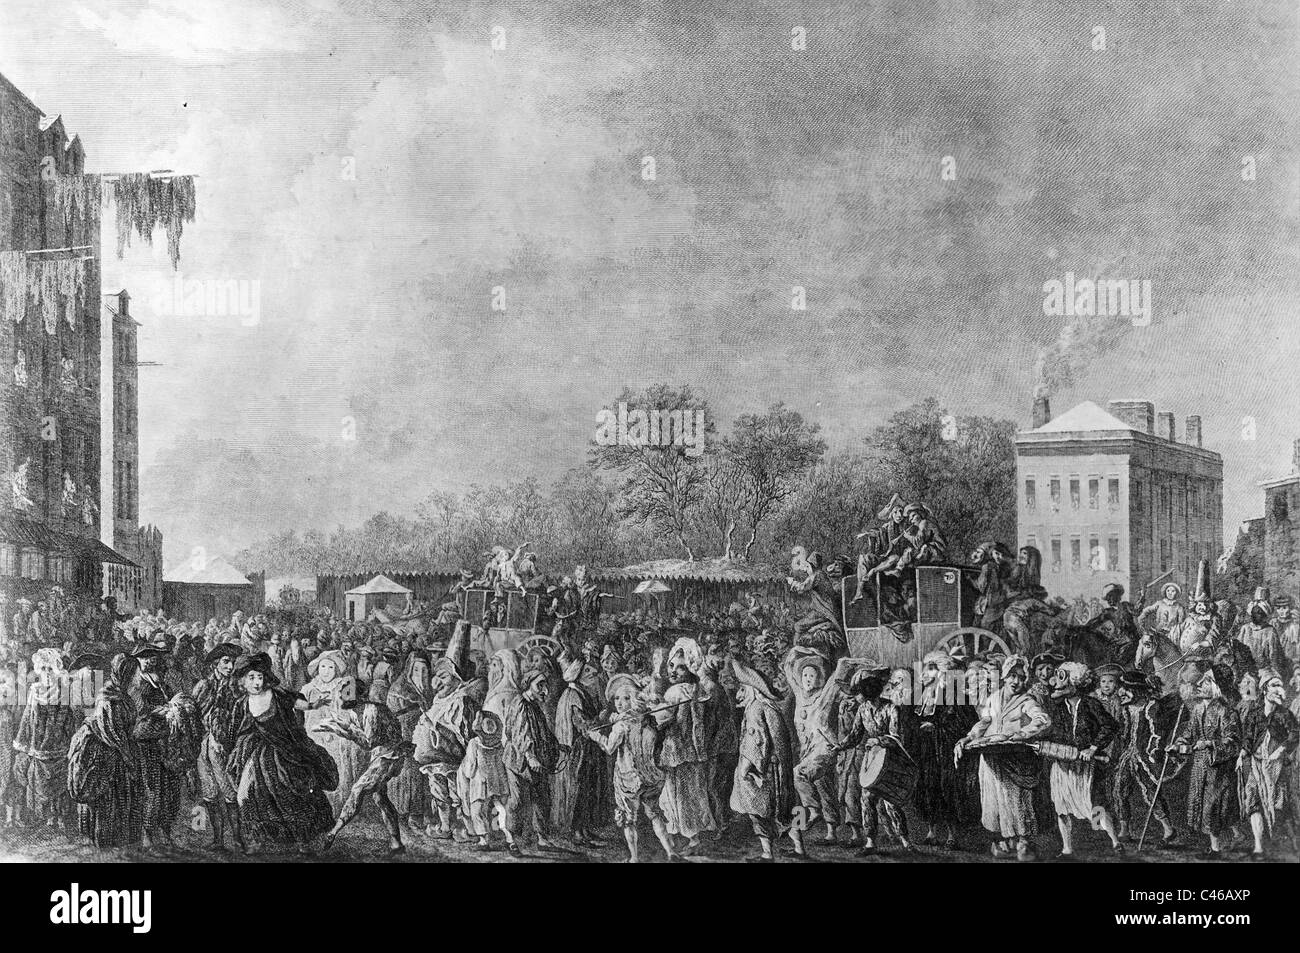 Carnival in a Paris suburb in the 18th century Stock Photo